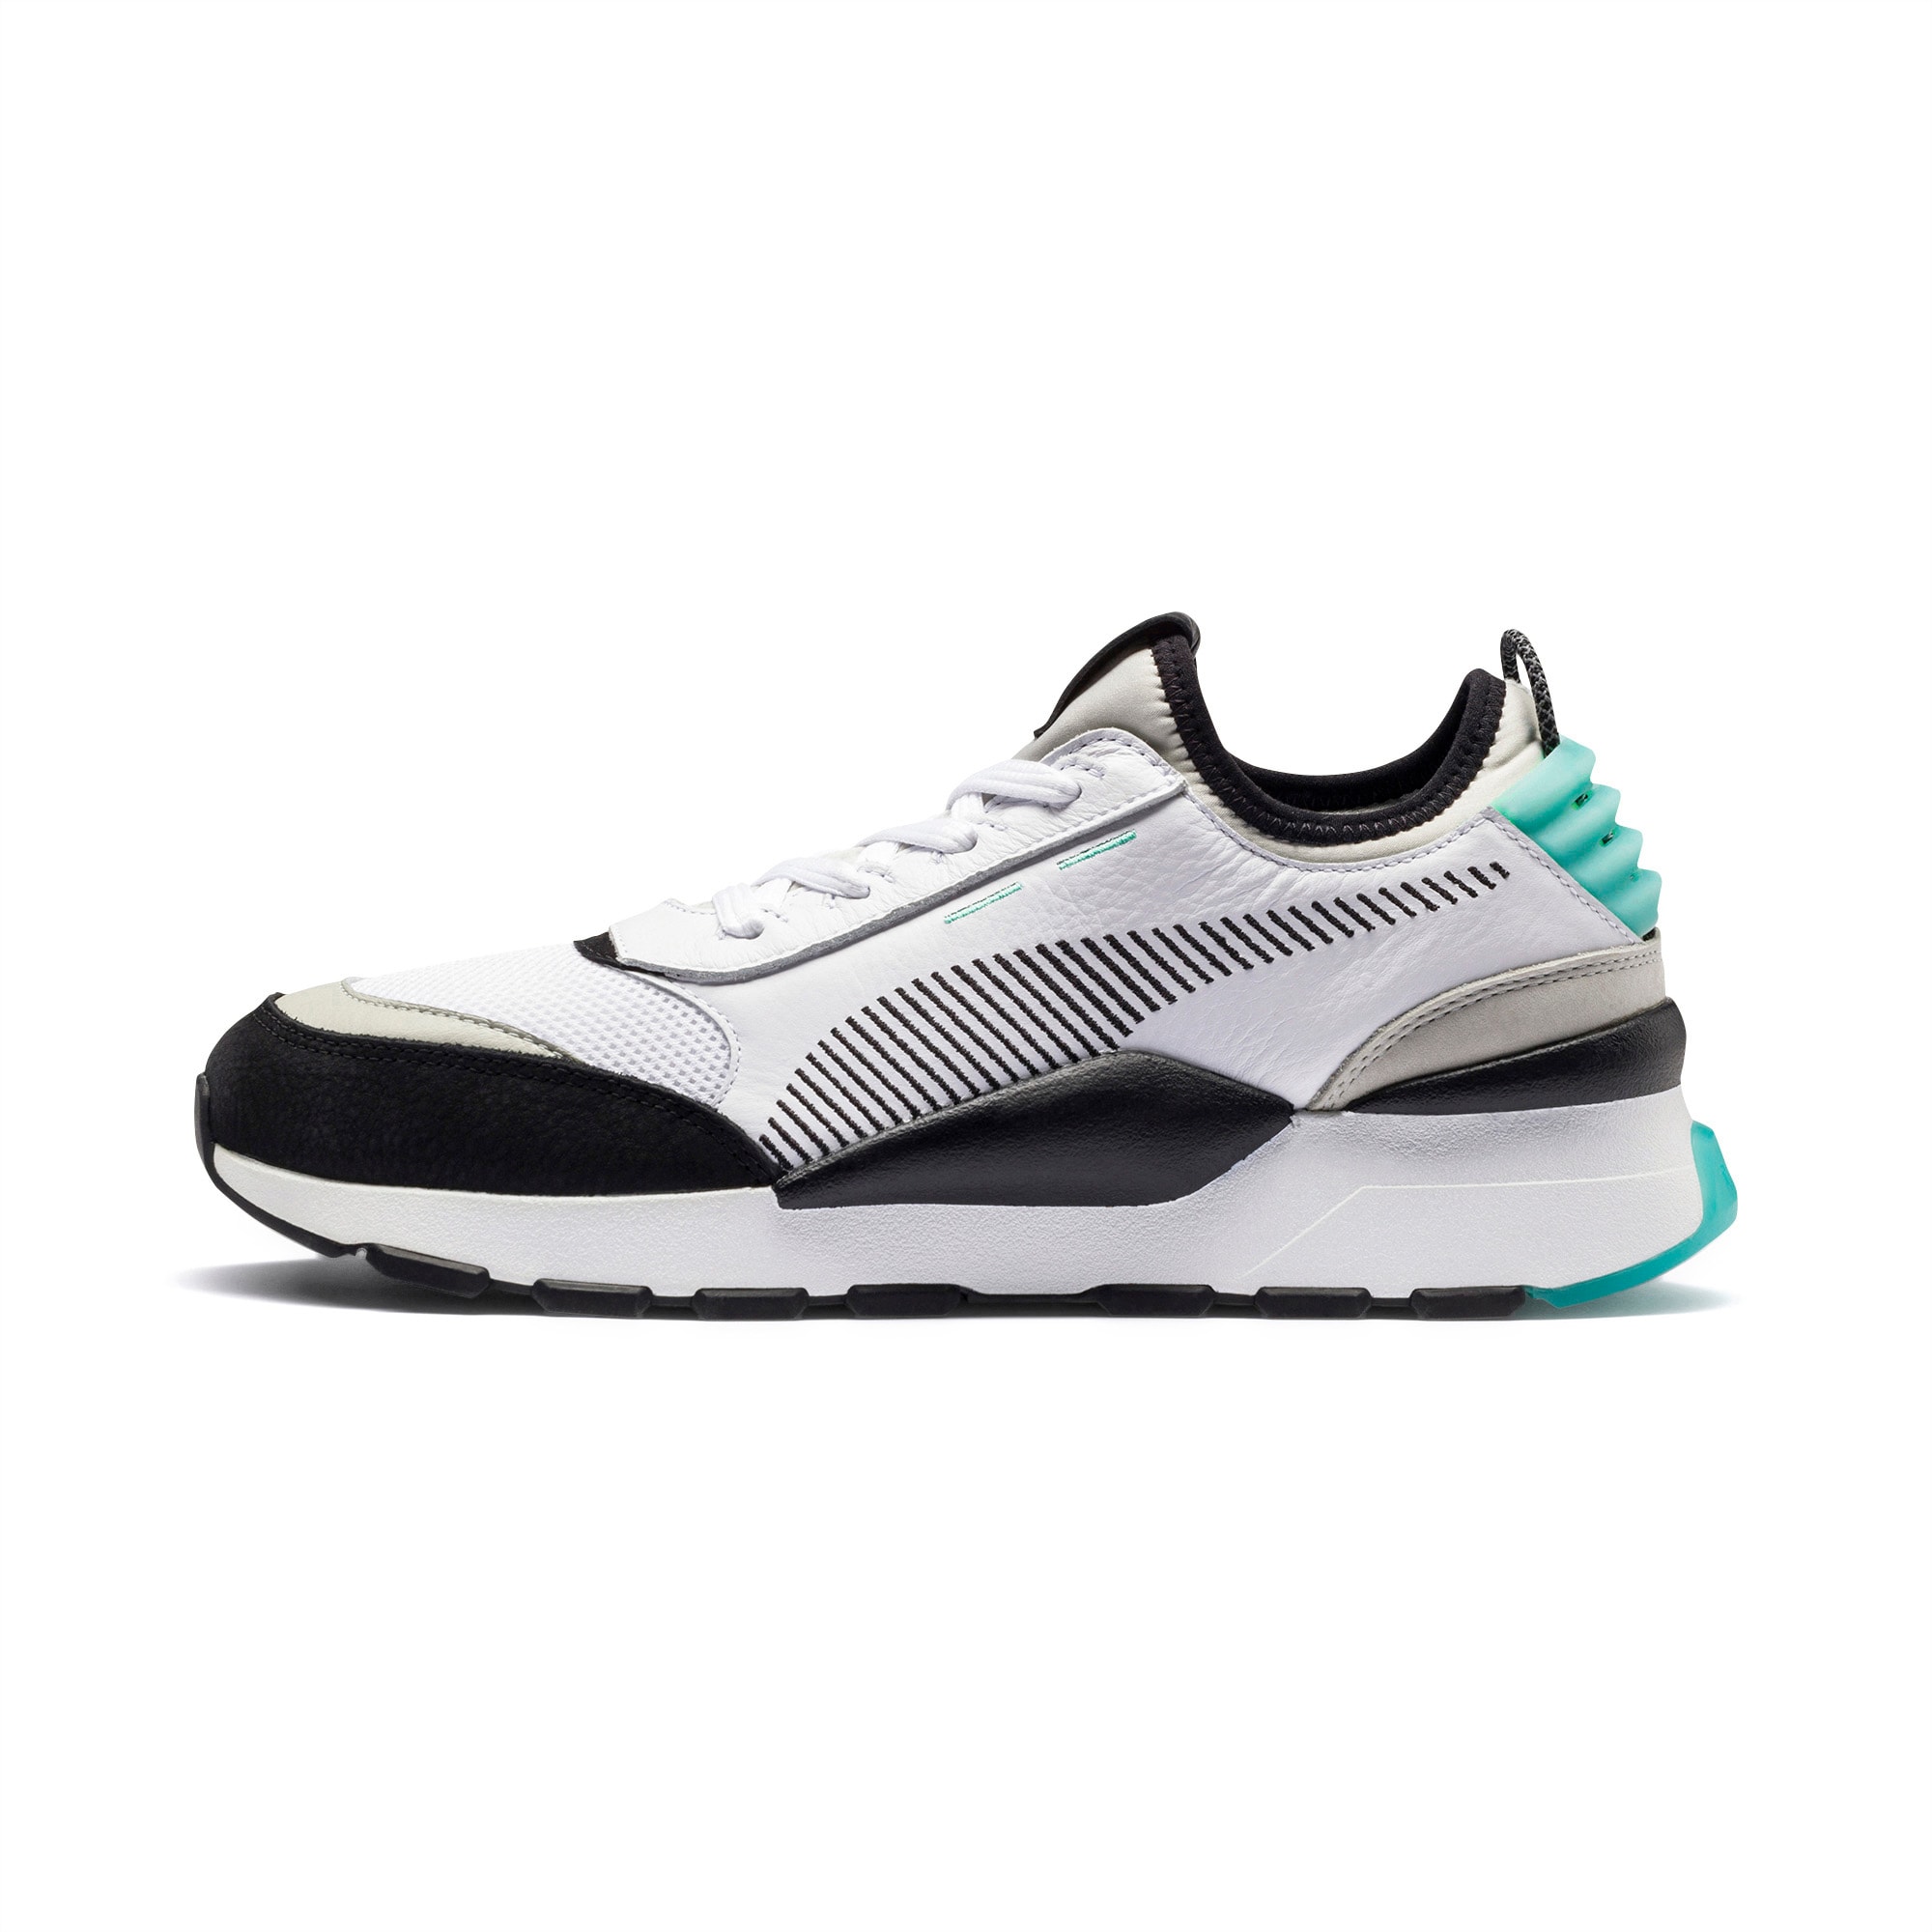 RS-0 Re-Invention Trainers | PUMA Sneakers | PUMA